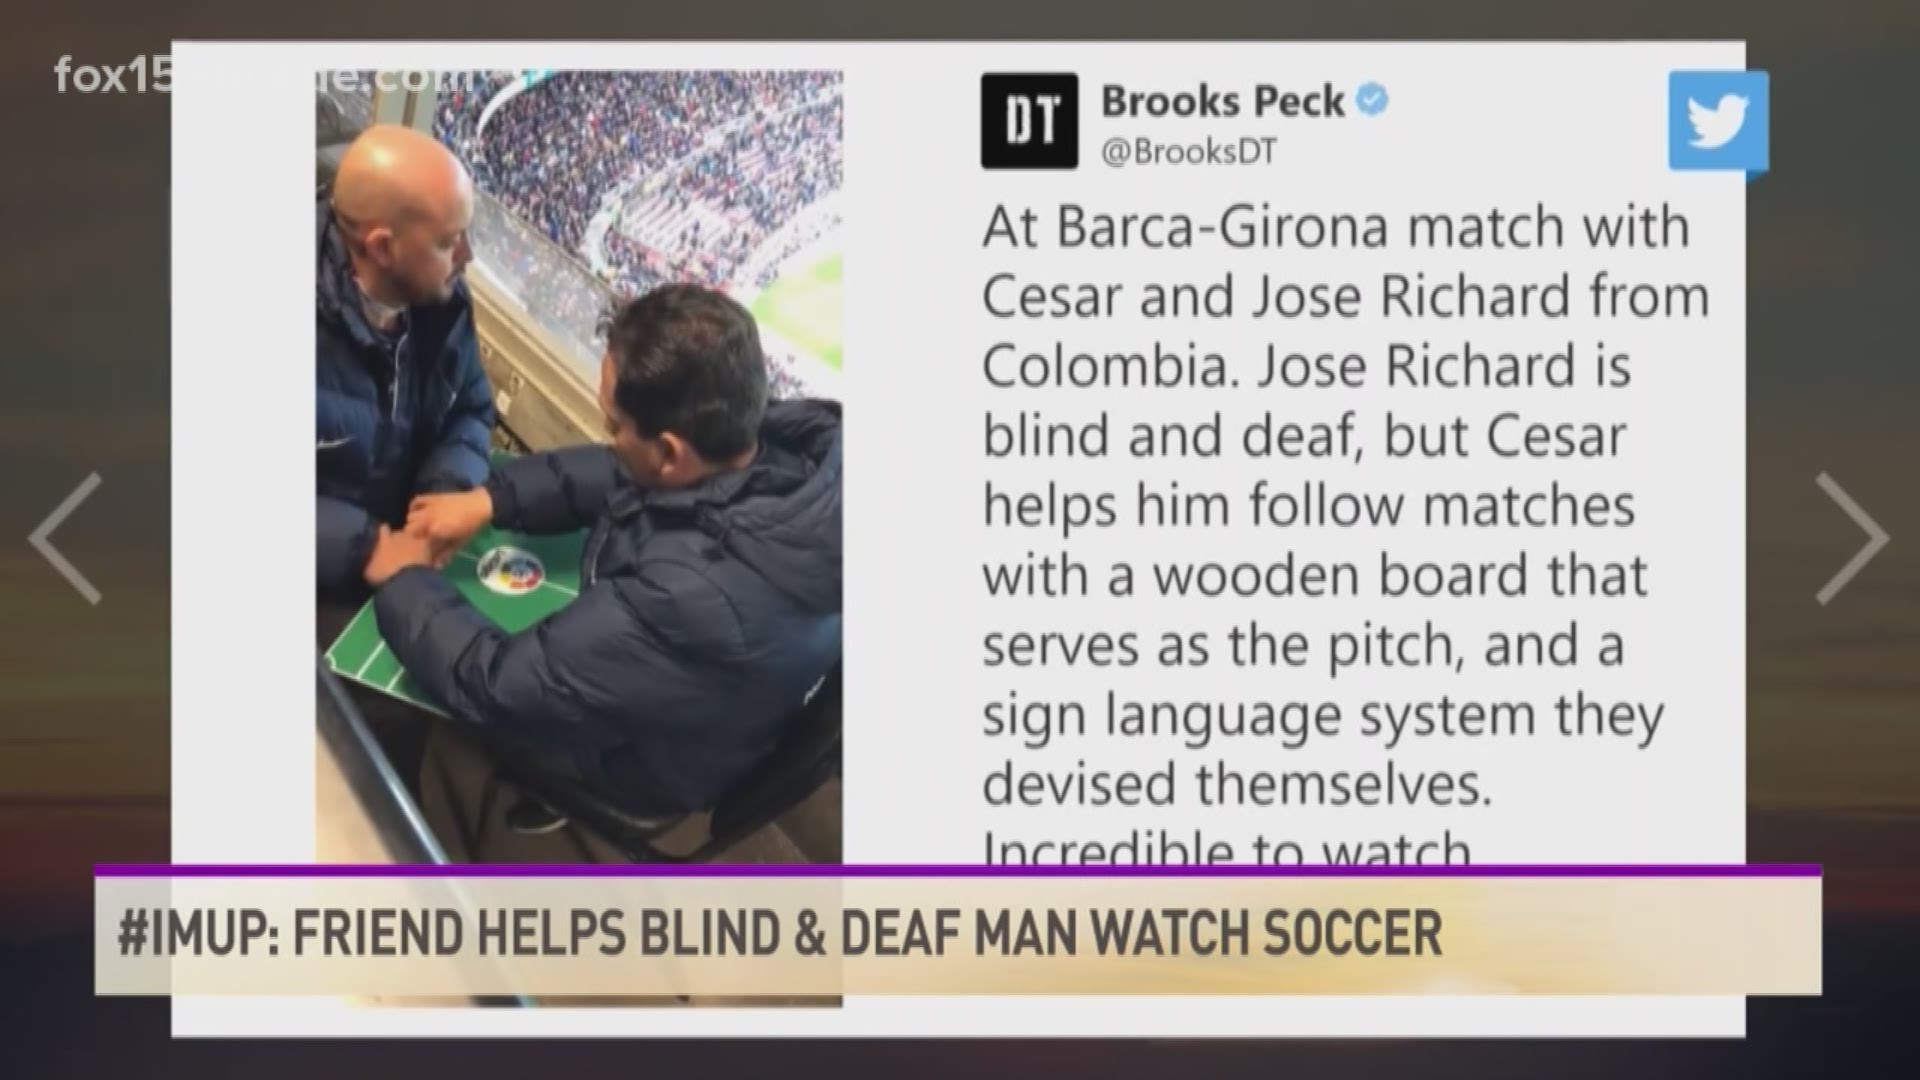 Trending all over Twitter the two create sign language system to communicate about soccer.